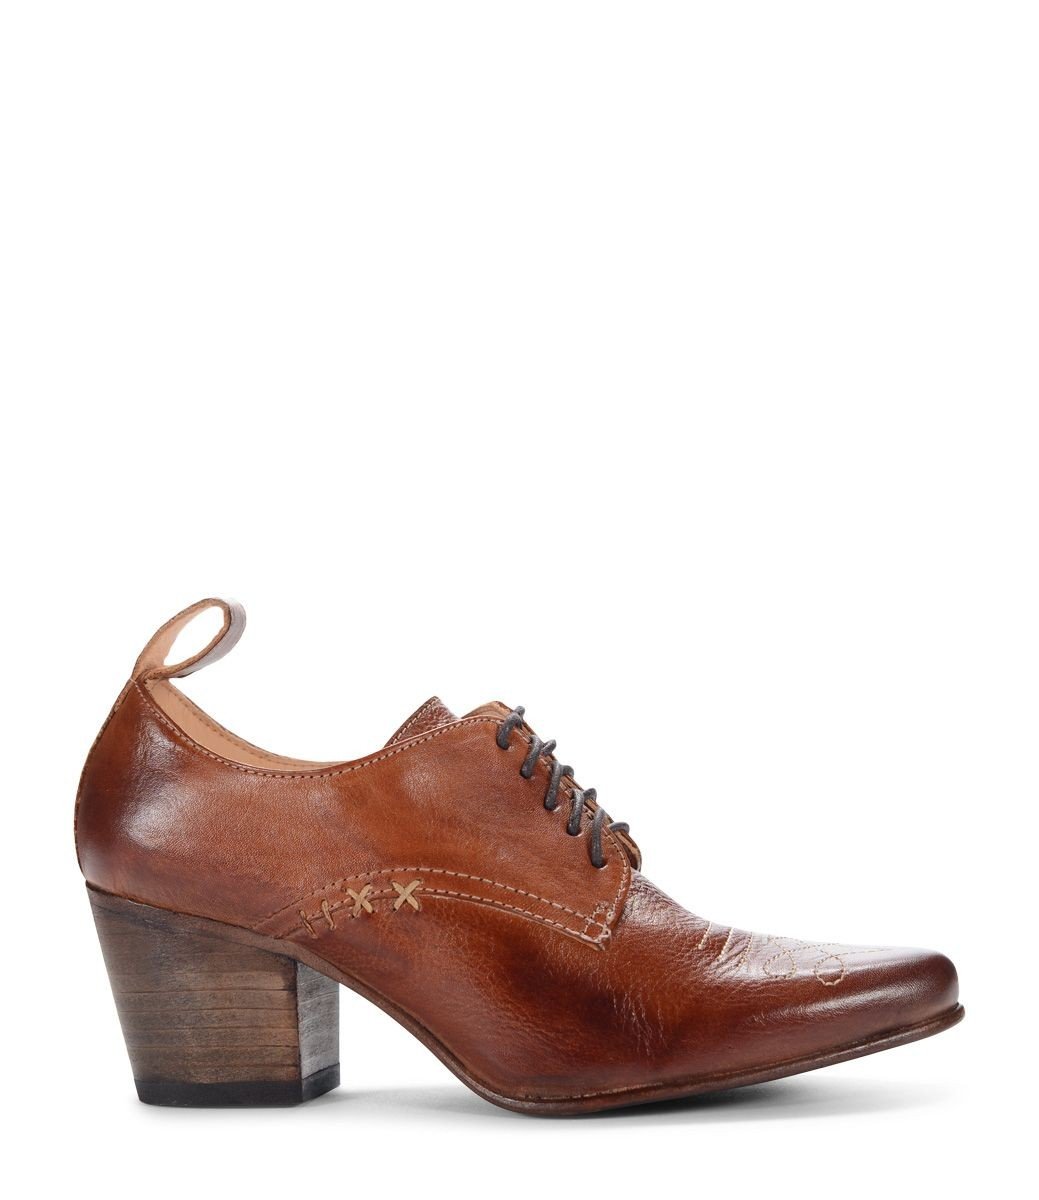 Retro Style Leather-Wrapped Heels in Cognac